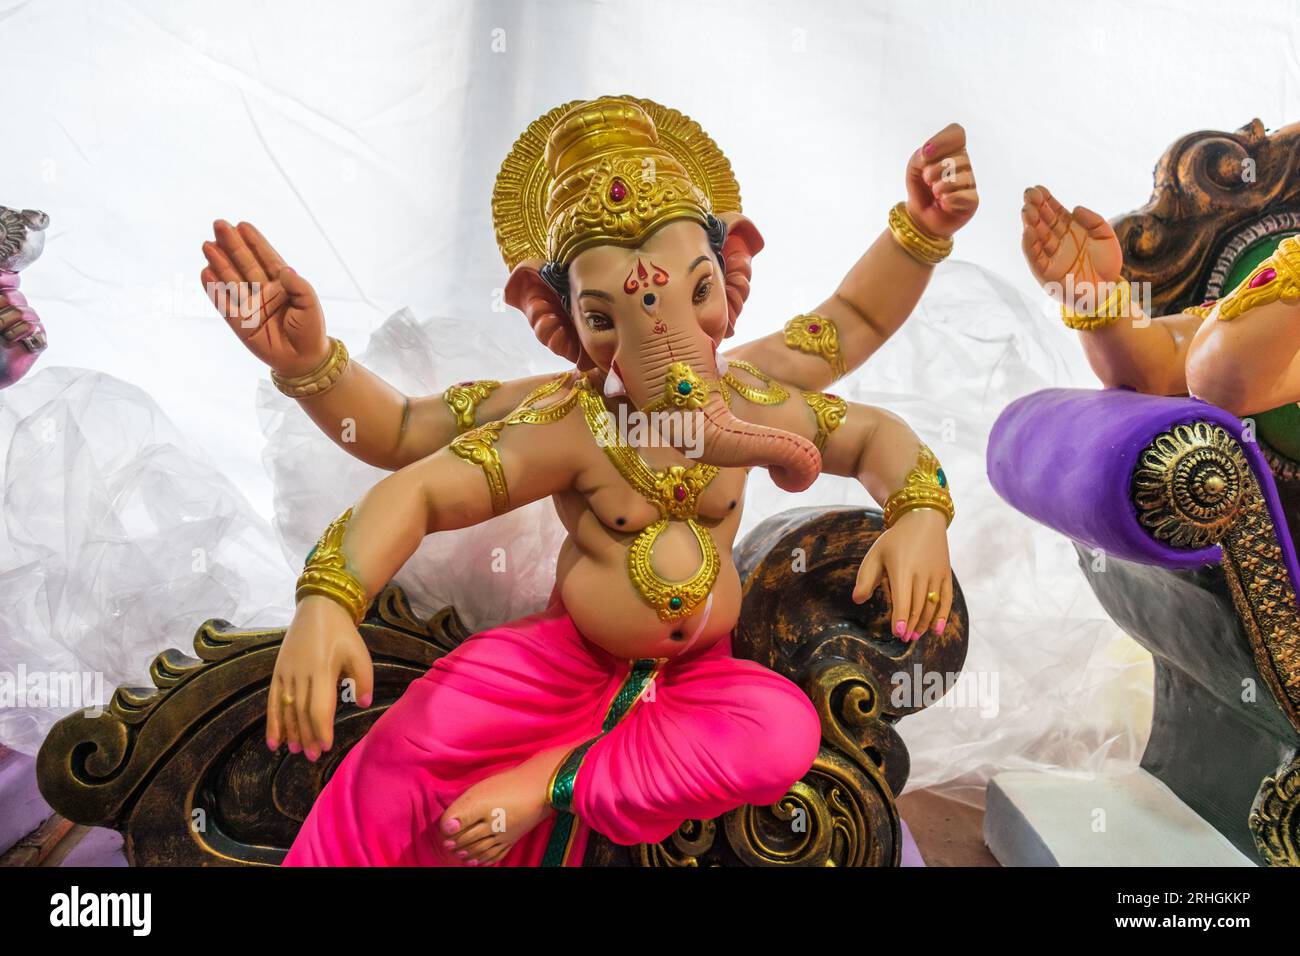 A beautiful idol of Lord Ganpati on display at a workshop in Mumbai, India for the festival of Ganesh Chaturthi Stock Photo